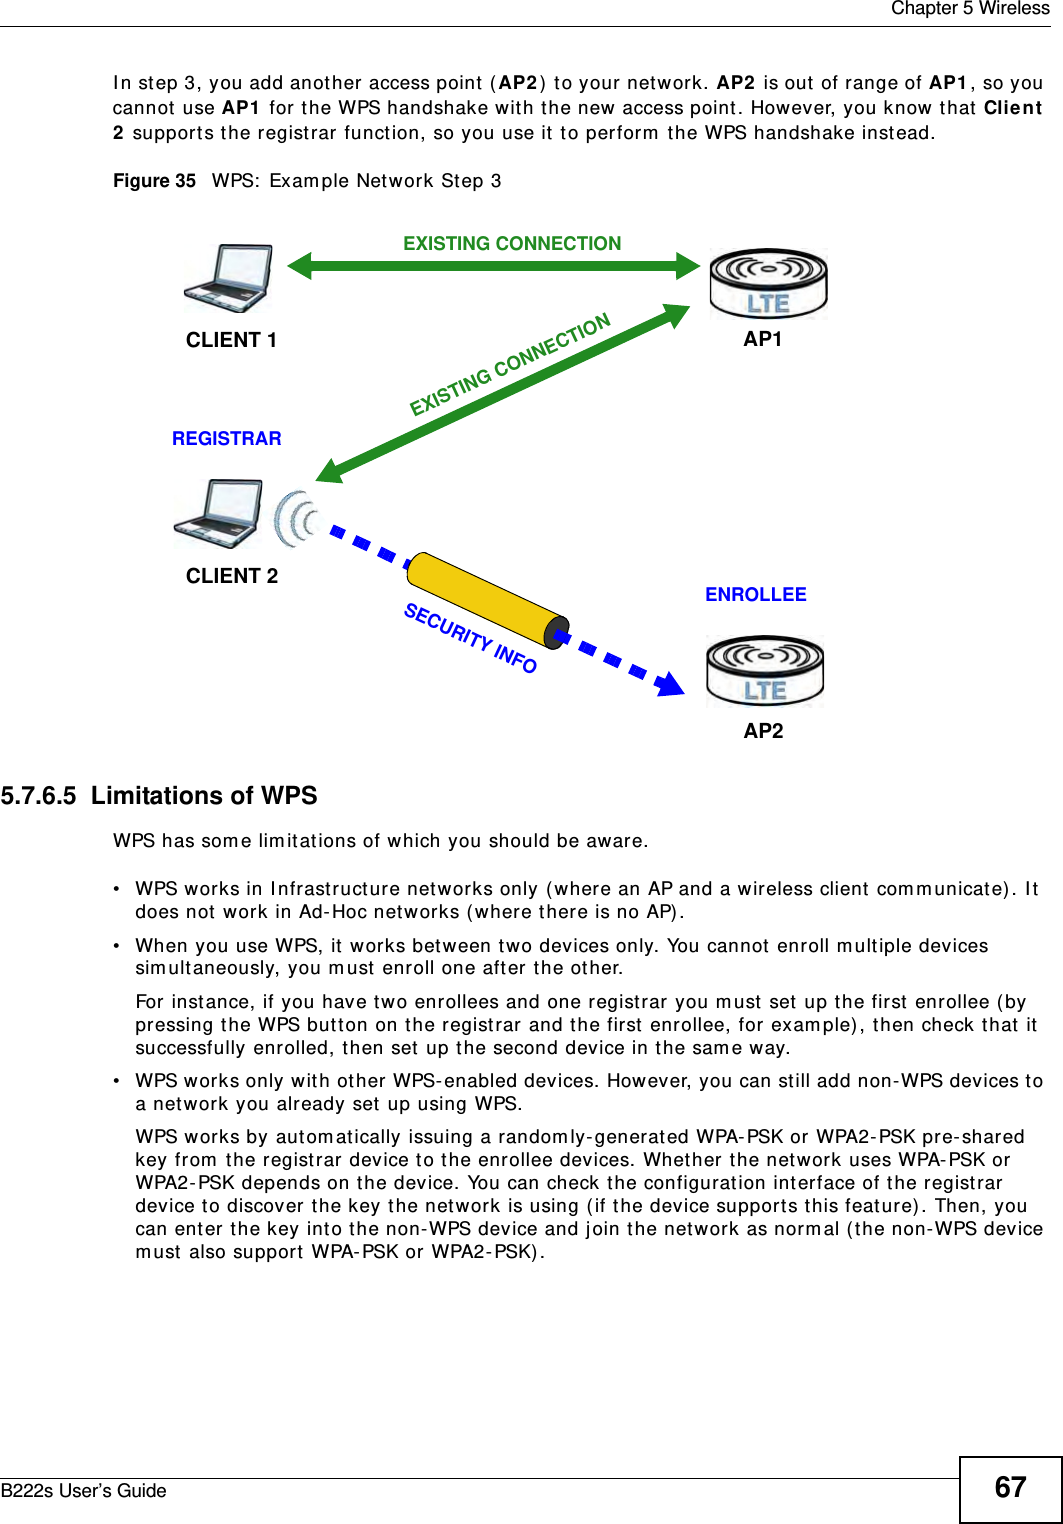  Chapter 5 WirelessB222s User’s Guide 67I n step 3, you add another access point (AP2 )  t o your net w ork. AP2  is out  of range of AP1 , so you cannot  use AP1  for the WPS handshake w it h t he new access point . However, you know t hat  Clie n t  2 support s the registrar funct ion, so you use it  t o perform  t he WPS handshake inst ead.Figure 35   WPS:  Exam ple Net work St ep 35.7.6.5  Limitations of WPSWPS has som e lim itat ions of which you should be aware. • WPS works in I nfrast ruct ure net works only ( where an AP and a wireless client com municate) . I t does not  work in Ad- Hoc net w orks (where there is no AP) .• When you use WPS, it wor ks bet ween t wo devices only. You cannot enroll m ultiple devices sim ultaneously, you m ust  enroll one after the other. For inst ance, if you have t w o enrollees and one registrar you m ust  set up t he first  enrollee ( by pressing the WPS but ton on t he registrar and the first enrollee, for exam ple) , t hen check t hat  it  successfully enrolled, t hen set  up the second device in t he sam e way.• WPS works only wit h other WPS-enabled devices. However, you can st ill add non-WPS devices t o a network you already set up using WPS. WPS works by aut om atically issuing a random ly- generat ed WPA- PSK or WPA2- PSK pre- shared key from  t he regist rar device to the enrollee devices. Whet her t he net work uses WPA-PSK or WPA2- PSK depends on t he device. You can check t he configurat ion int erface of t he regist rar device t o discover t he key the network is using ( if t he device support s this feat ure). Then, you can ent er the key into t he non-WPS device and j oin t he net work as norm al (t he non-WPS device m ust also support  WPA- PSK or WPA2- PSK) .CLIENT 1 AP1REGISTRARCLIENT 2EXISTING CONNECTIONSECURITY INFOENROLLEEAP2EXISTING CONNECTION